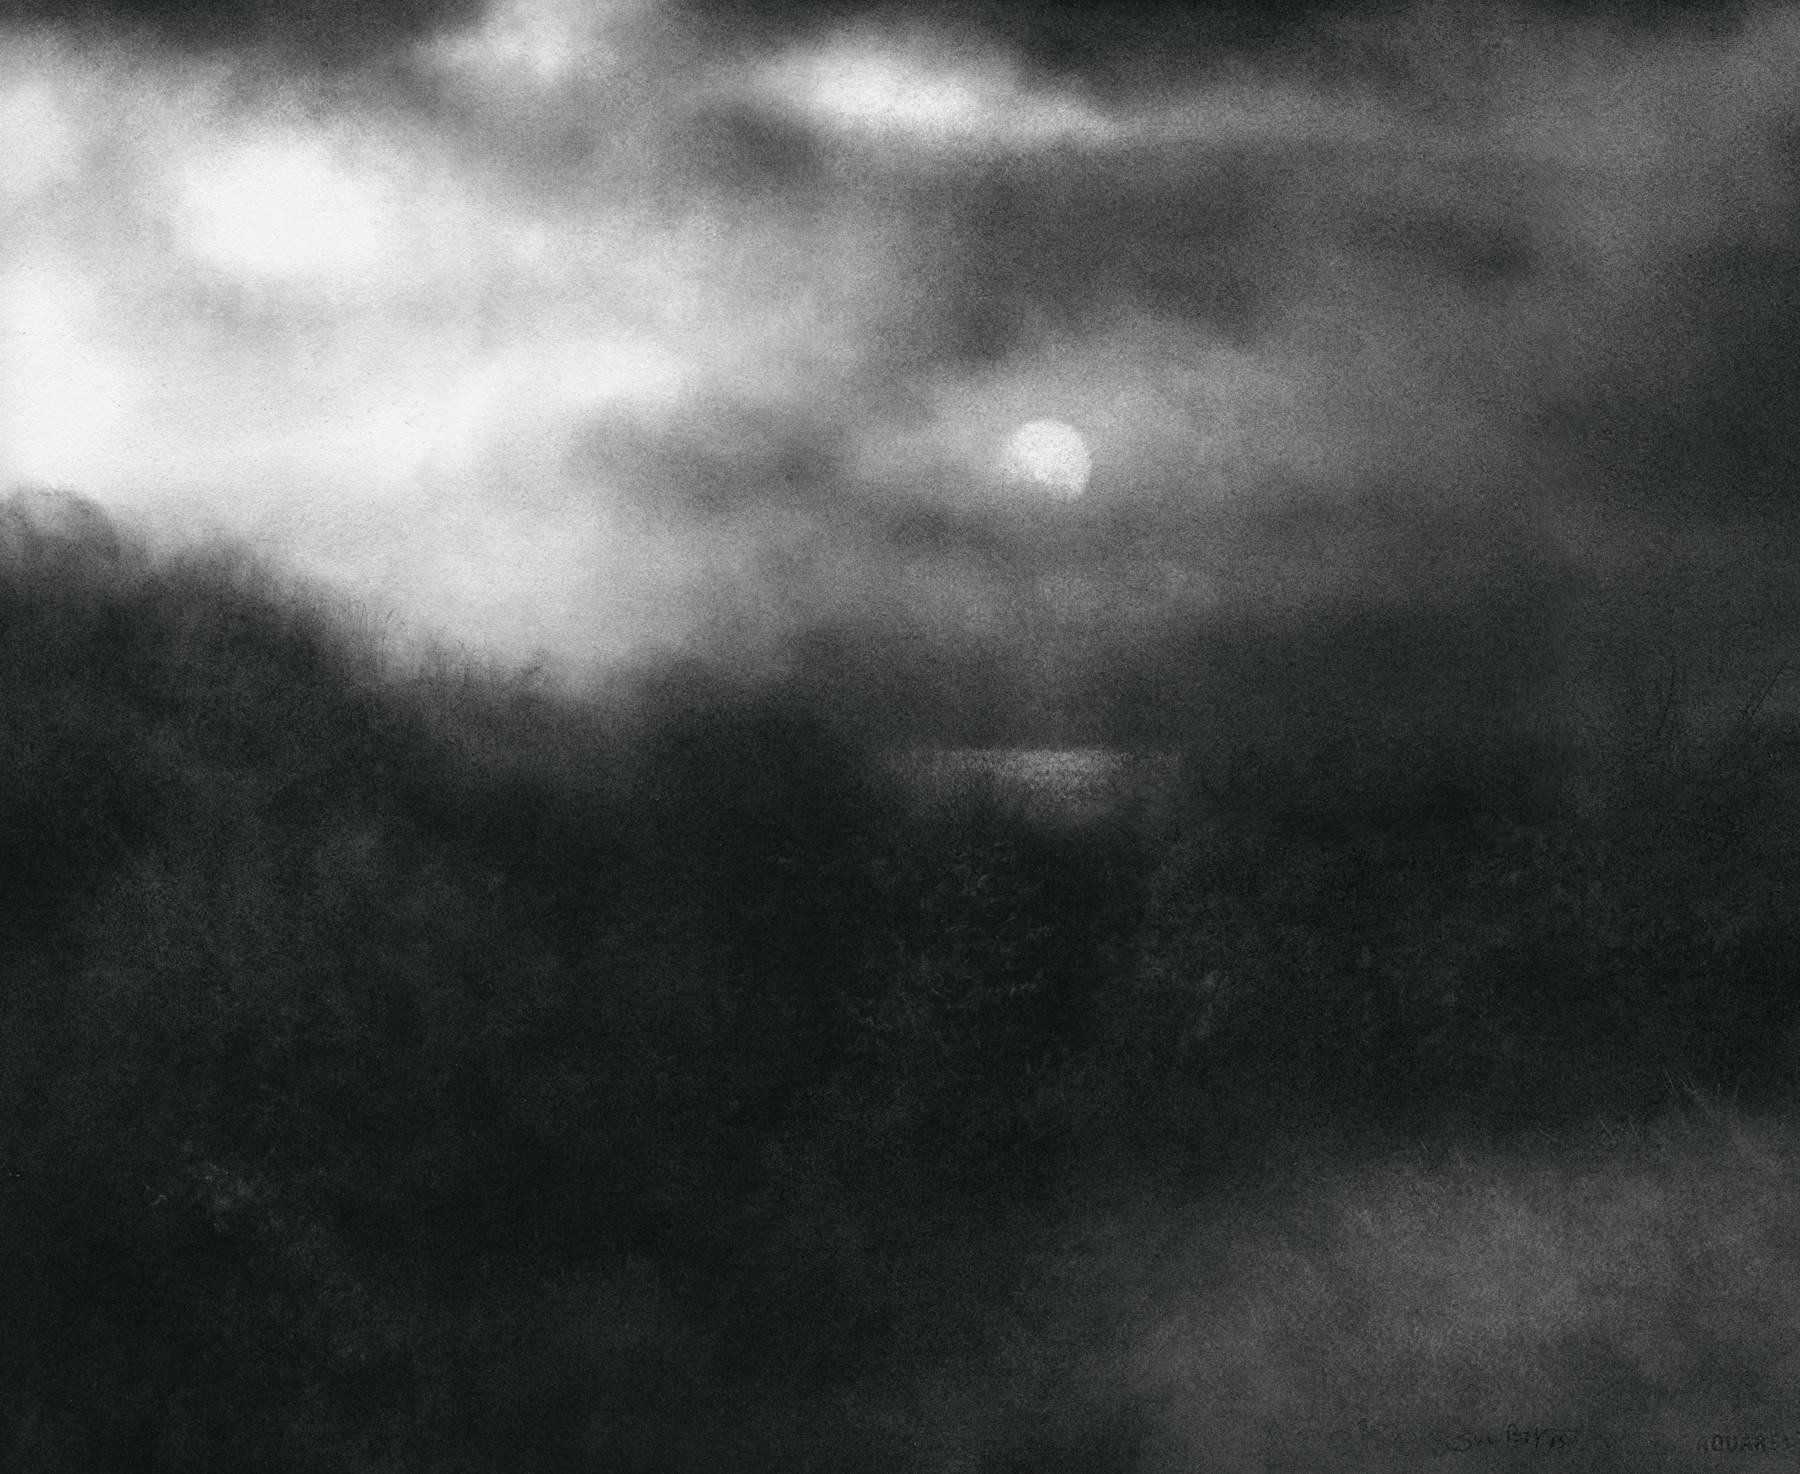 The Long Black Land (Black & White Charcoal Landscape Drawing of Moon & Clouds) - Art by Sue Bryan